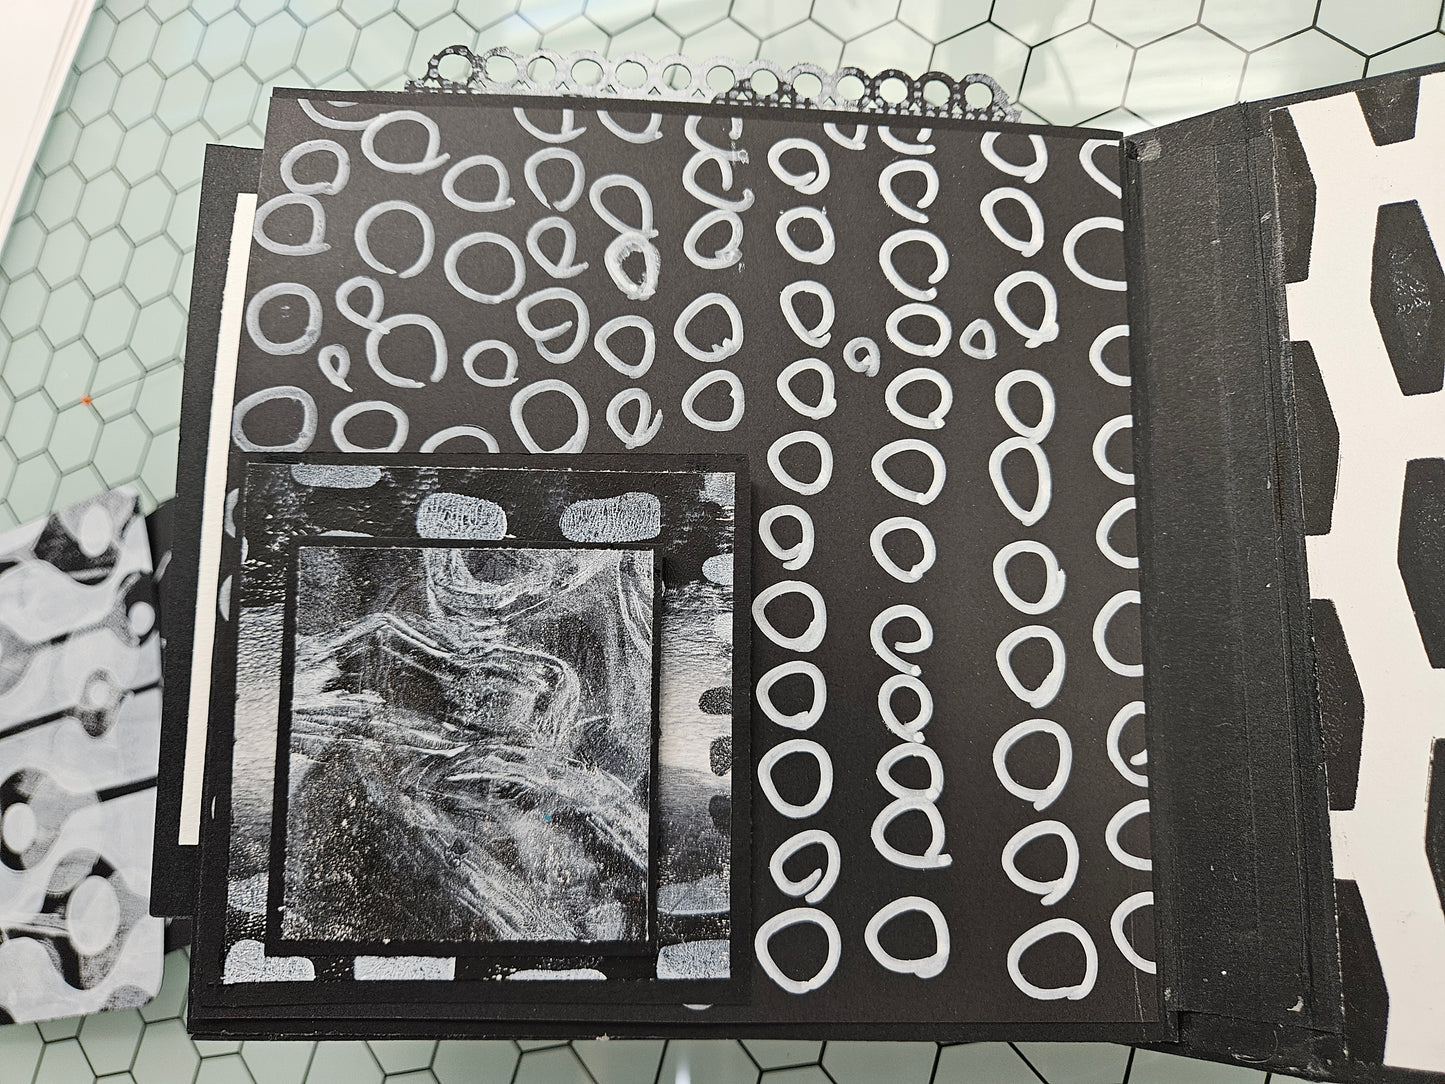 CHONKY MONKEY Hand-Painted Album - Black and White: 7"x7": Multi-Media Painted Pages, Waterfall Hinge Binding, Tie Closure